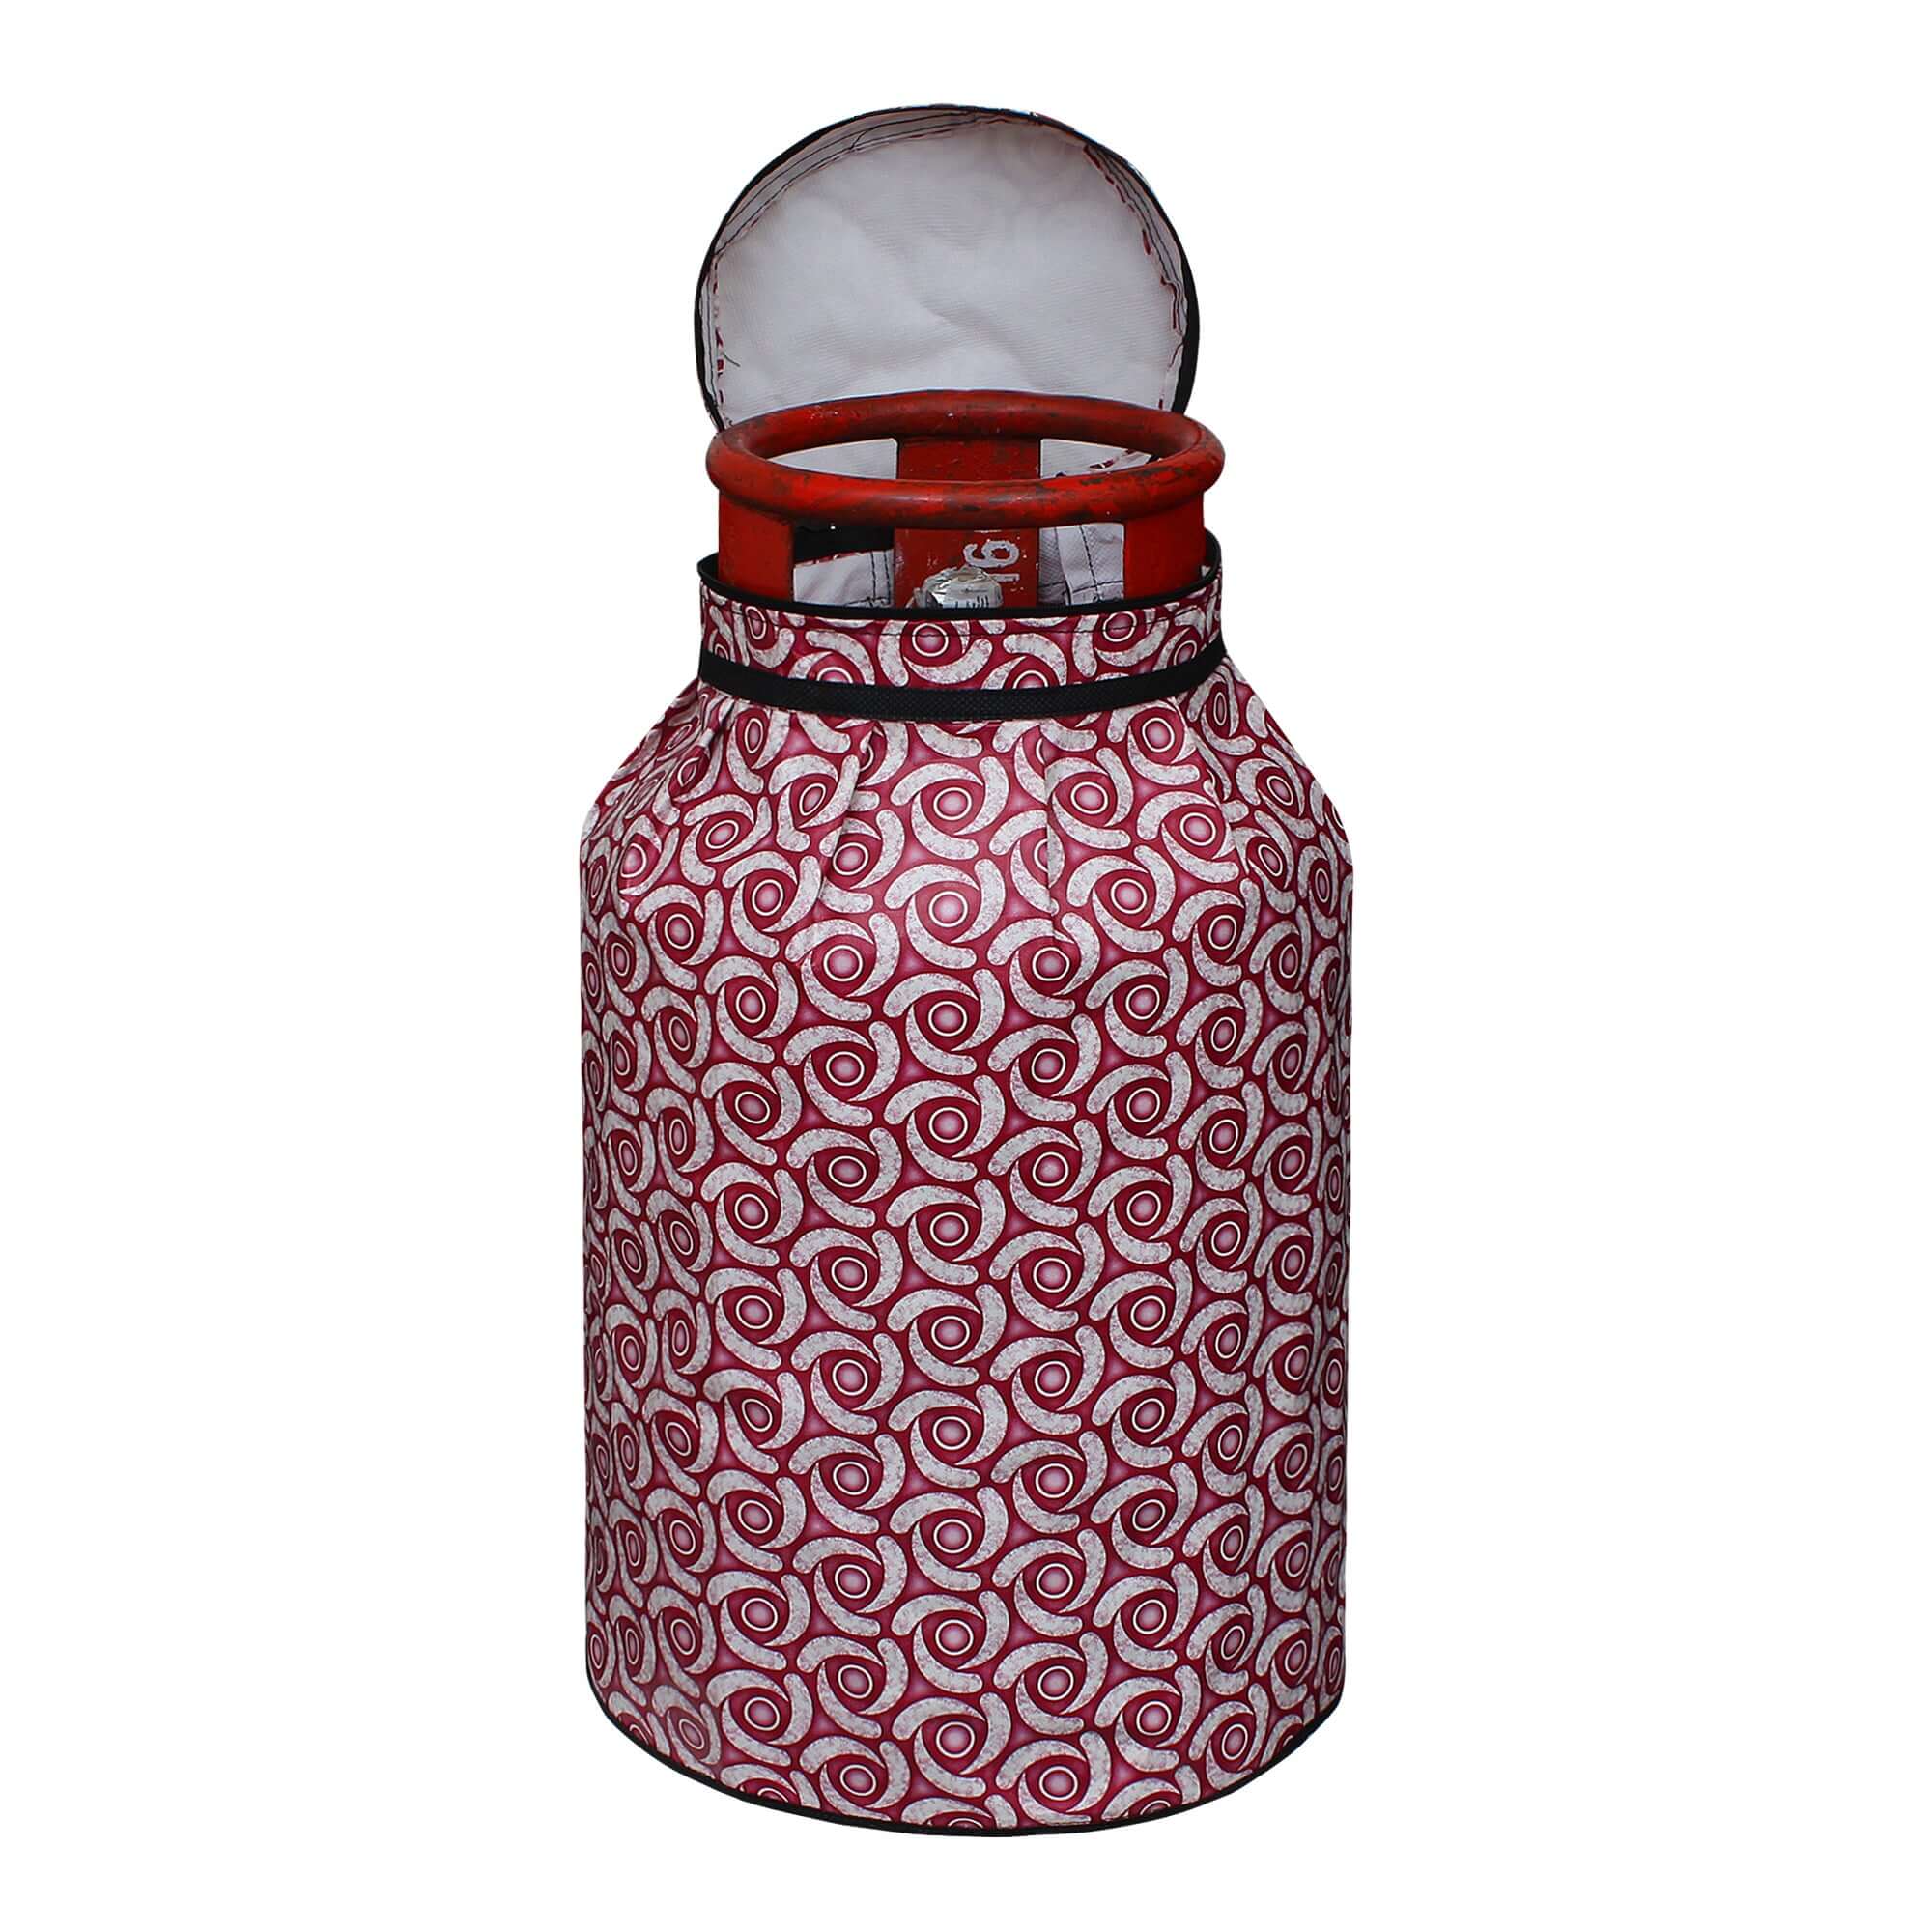 LPG Gas Cylinder Cover, SA57 - Dream Care Furnishings Private Limited